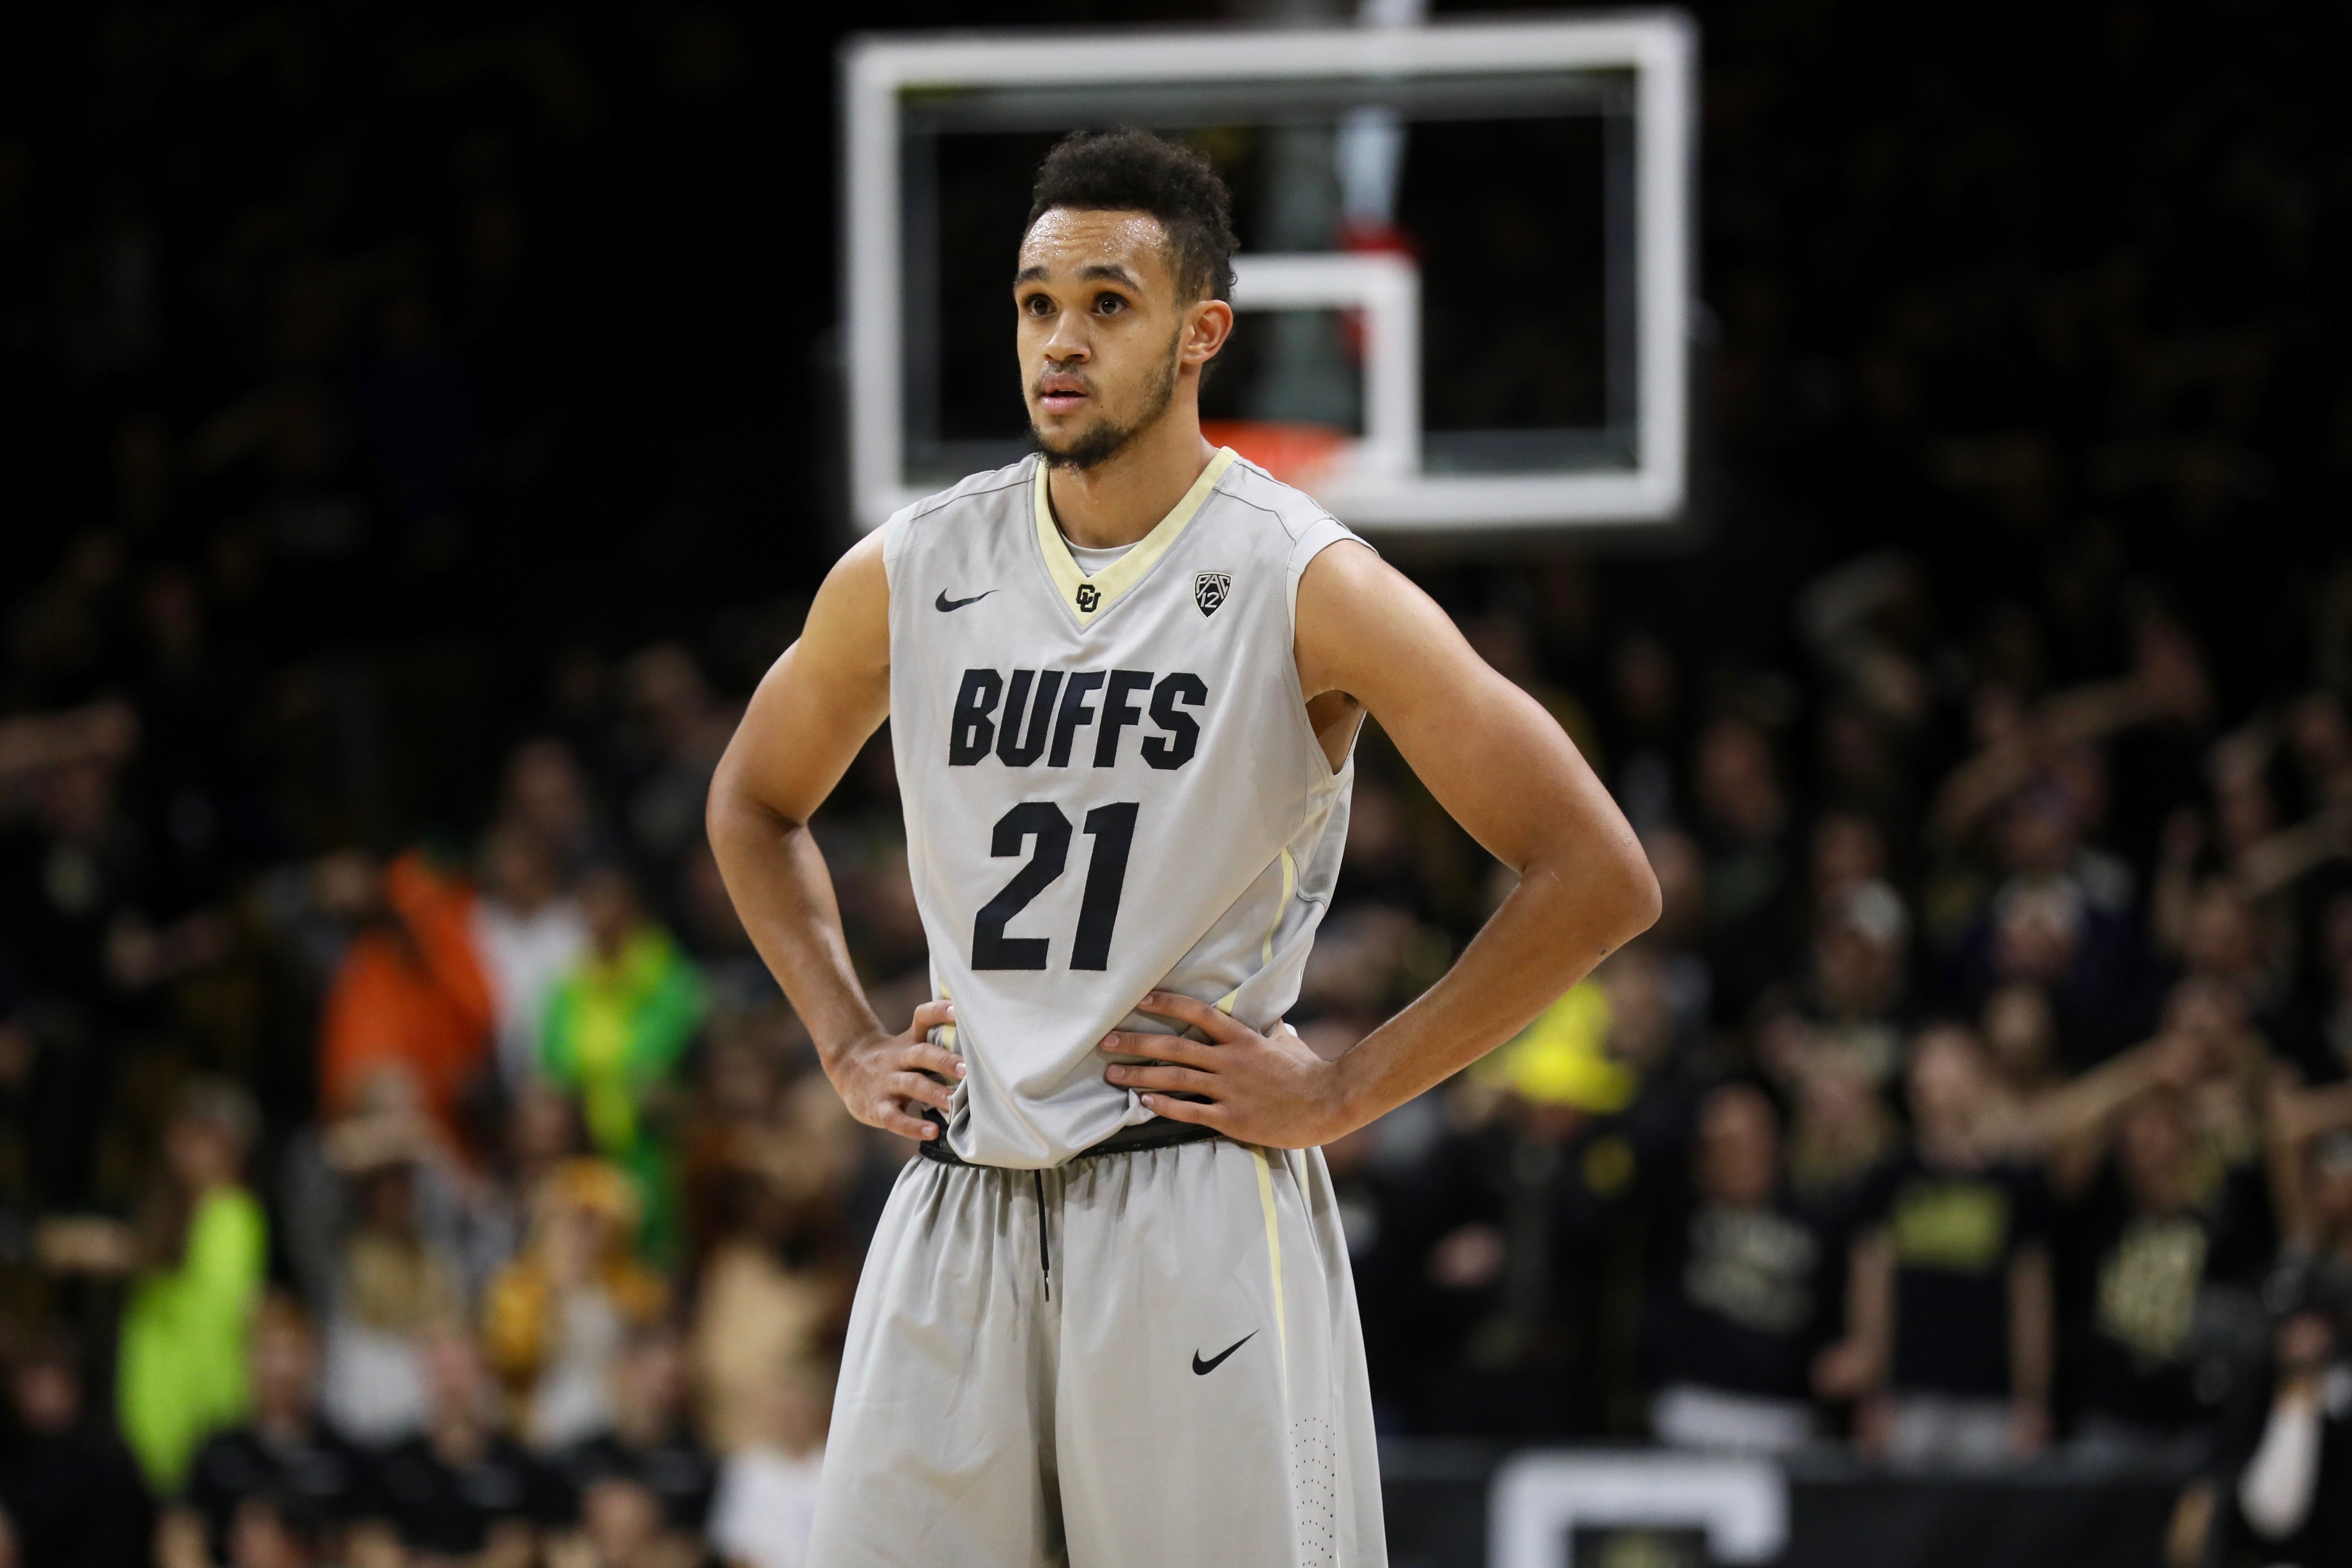 Buffs suffer rough home loss to CSU, fall 72-58 on night of bad shooting